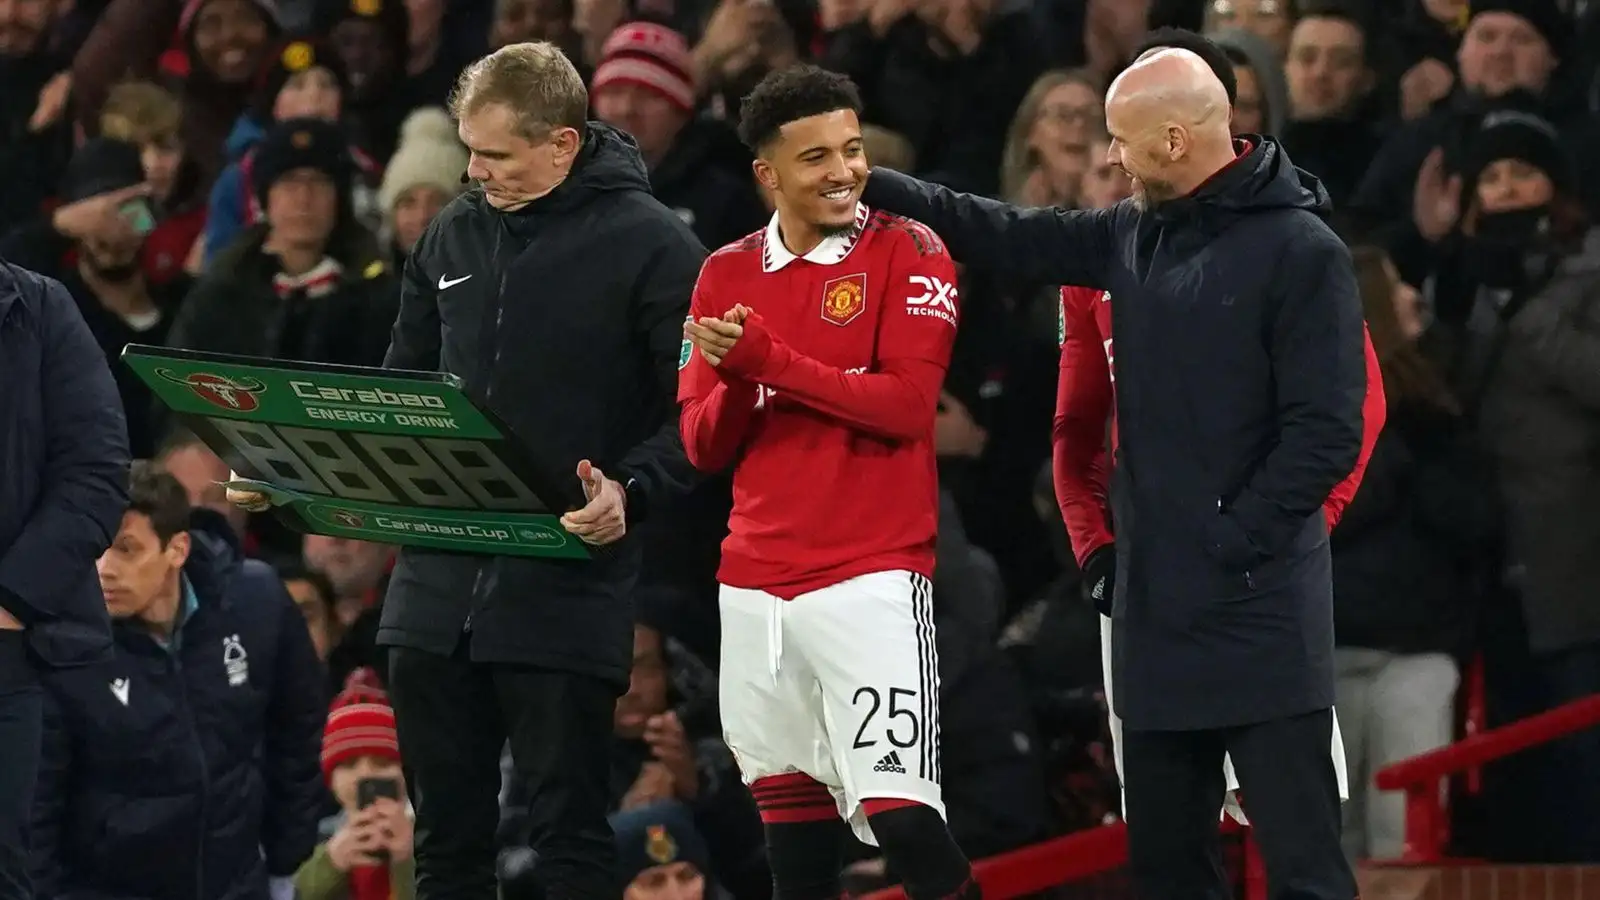 Jadon Sancho with Erik ten Hag before coming on to the pitch.